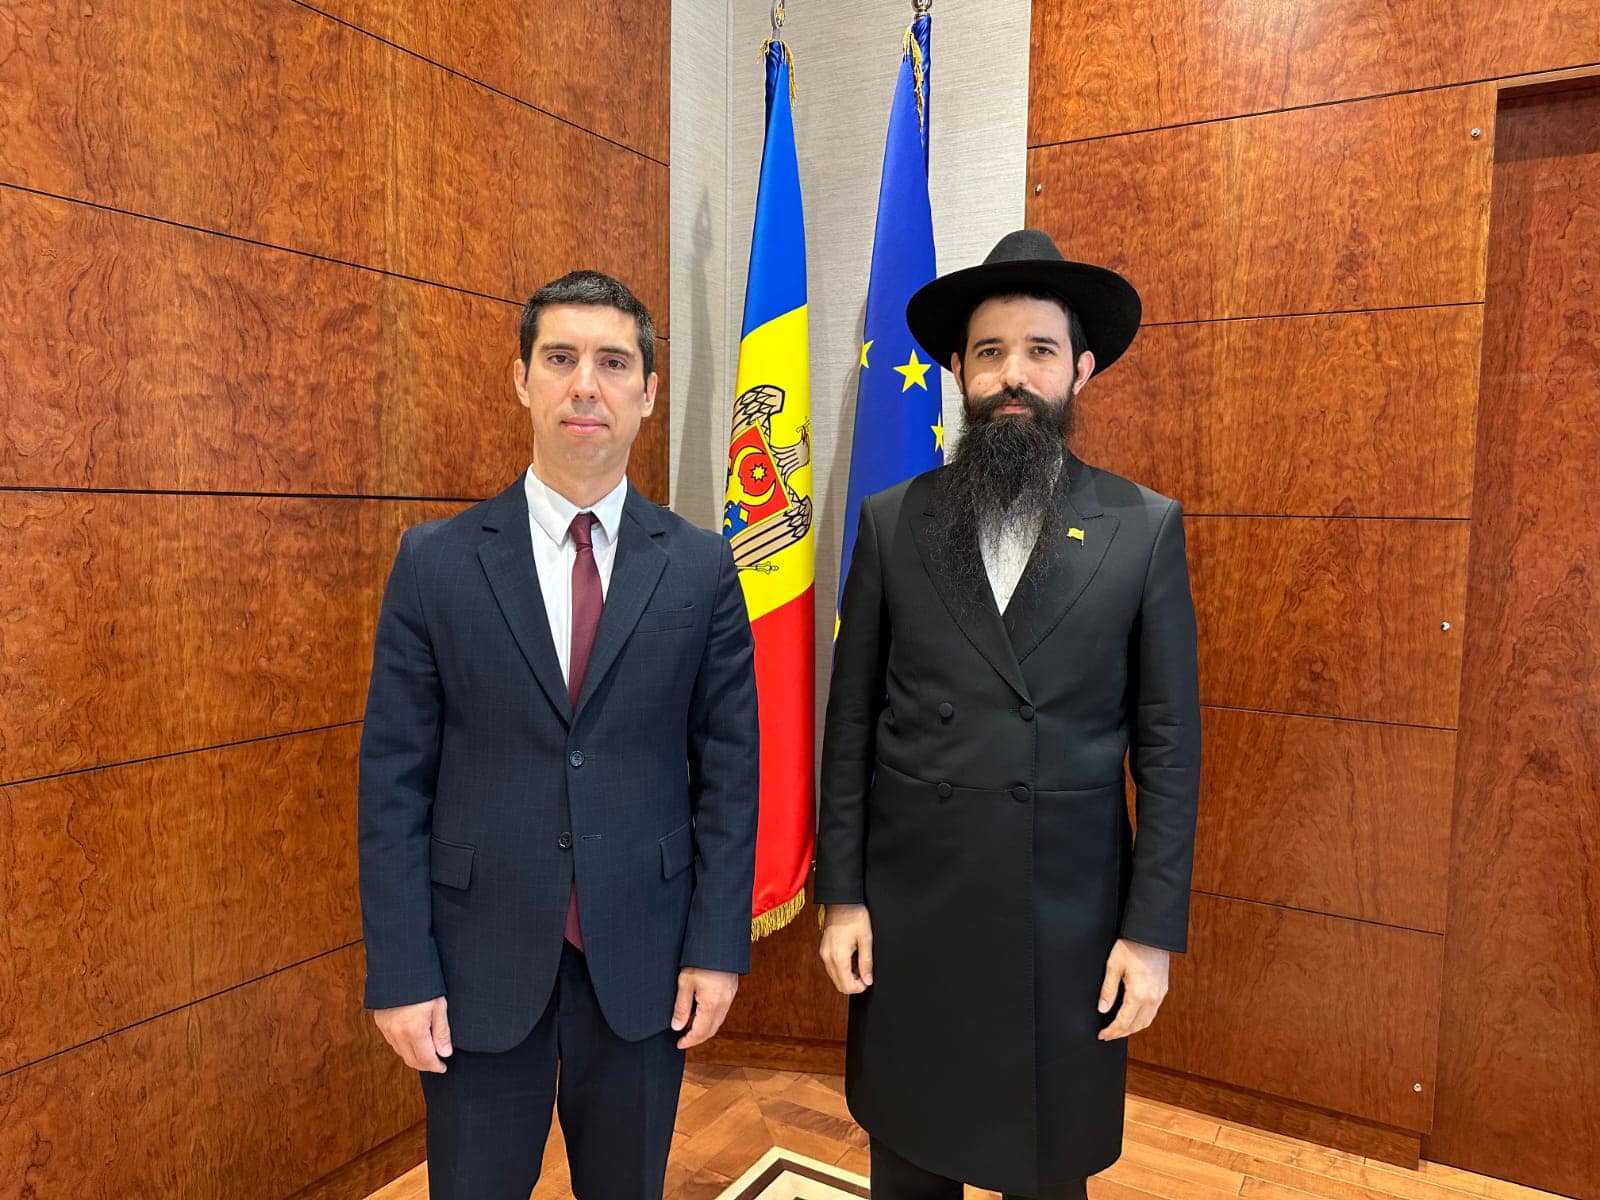 The Chief Rabbi of Kishinev met with the Vice-Chairman of the Moldovan Parliament